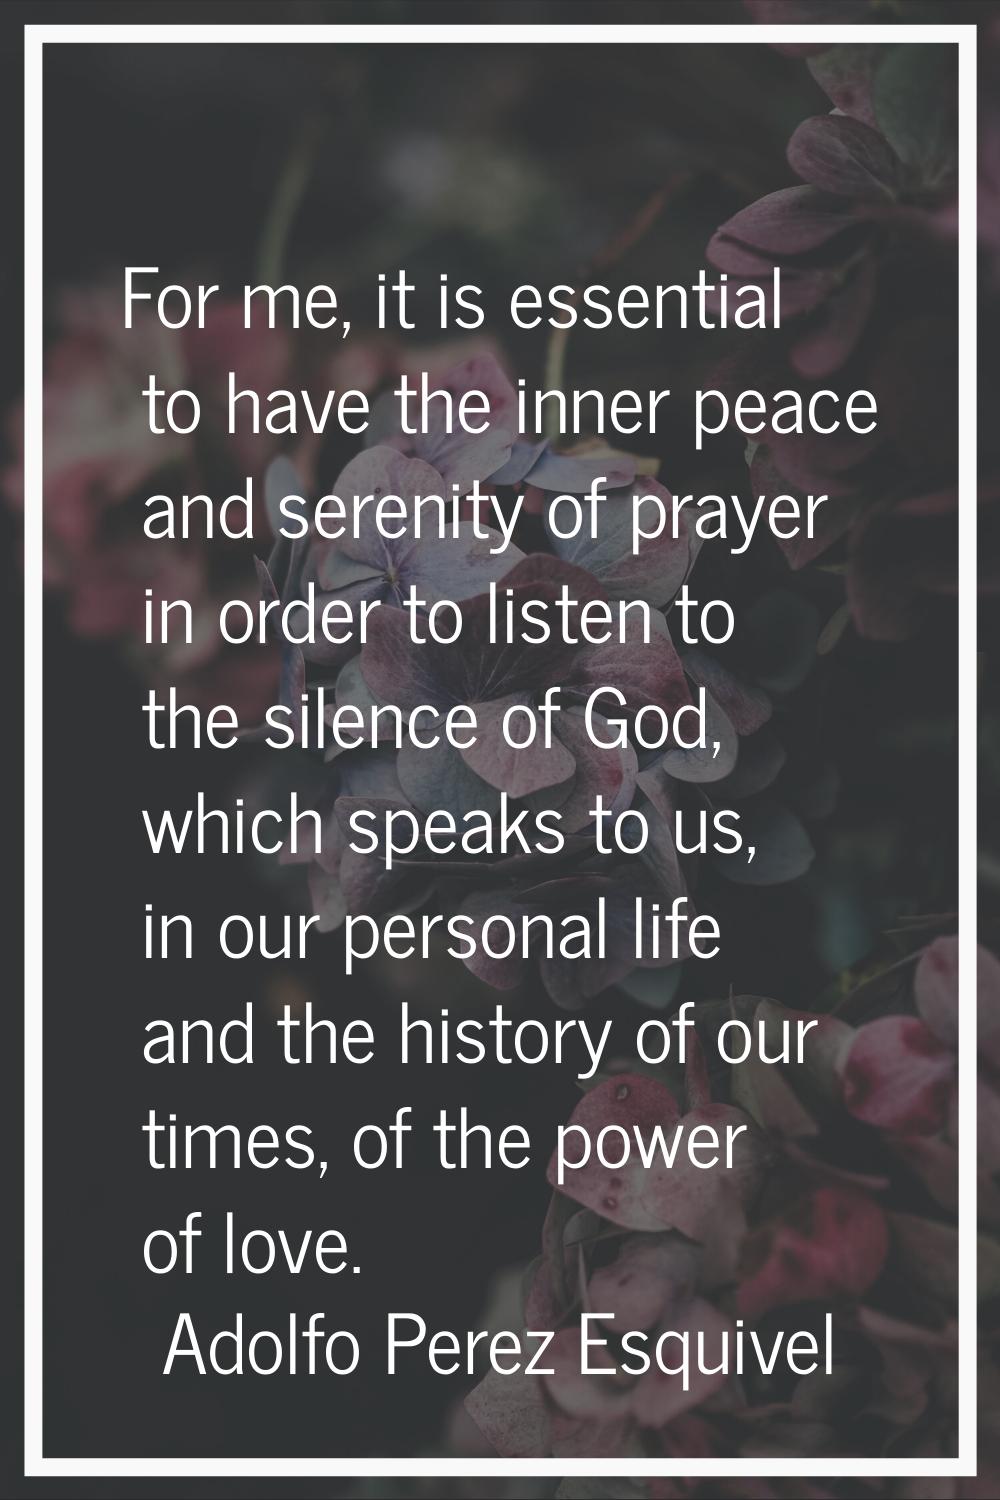 For me, it is essential to have the inner peace and serenity of prayer in order to listen to the si